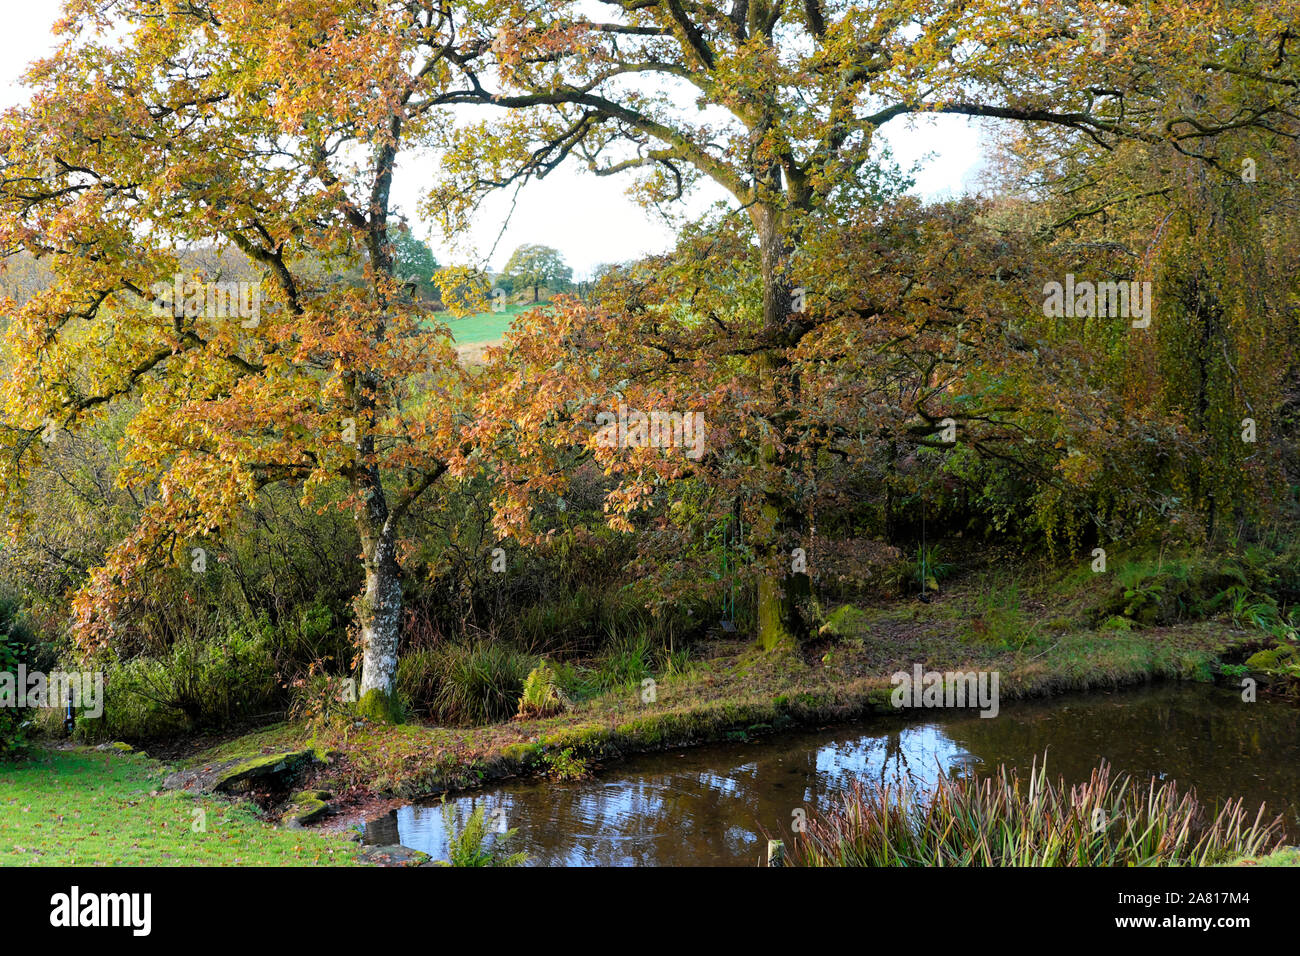 Oak trees leaves in full autumn colour on a sunny day by a garden pond in October sunshine Carmarthenshire Wales UK  KATHY DEWITT Stock Photo